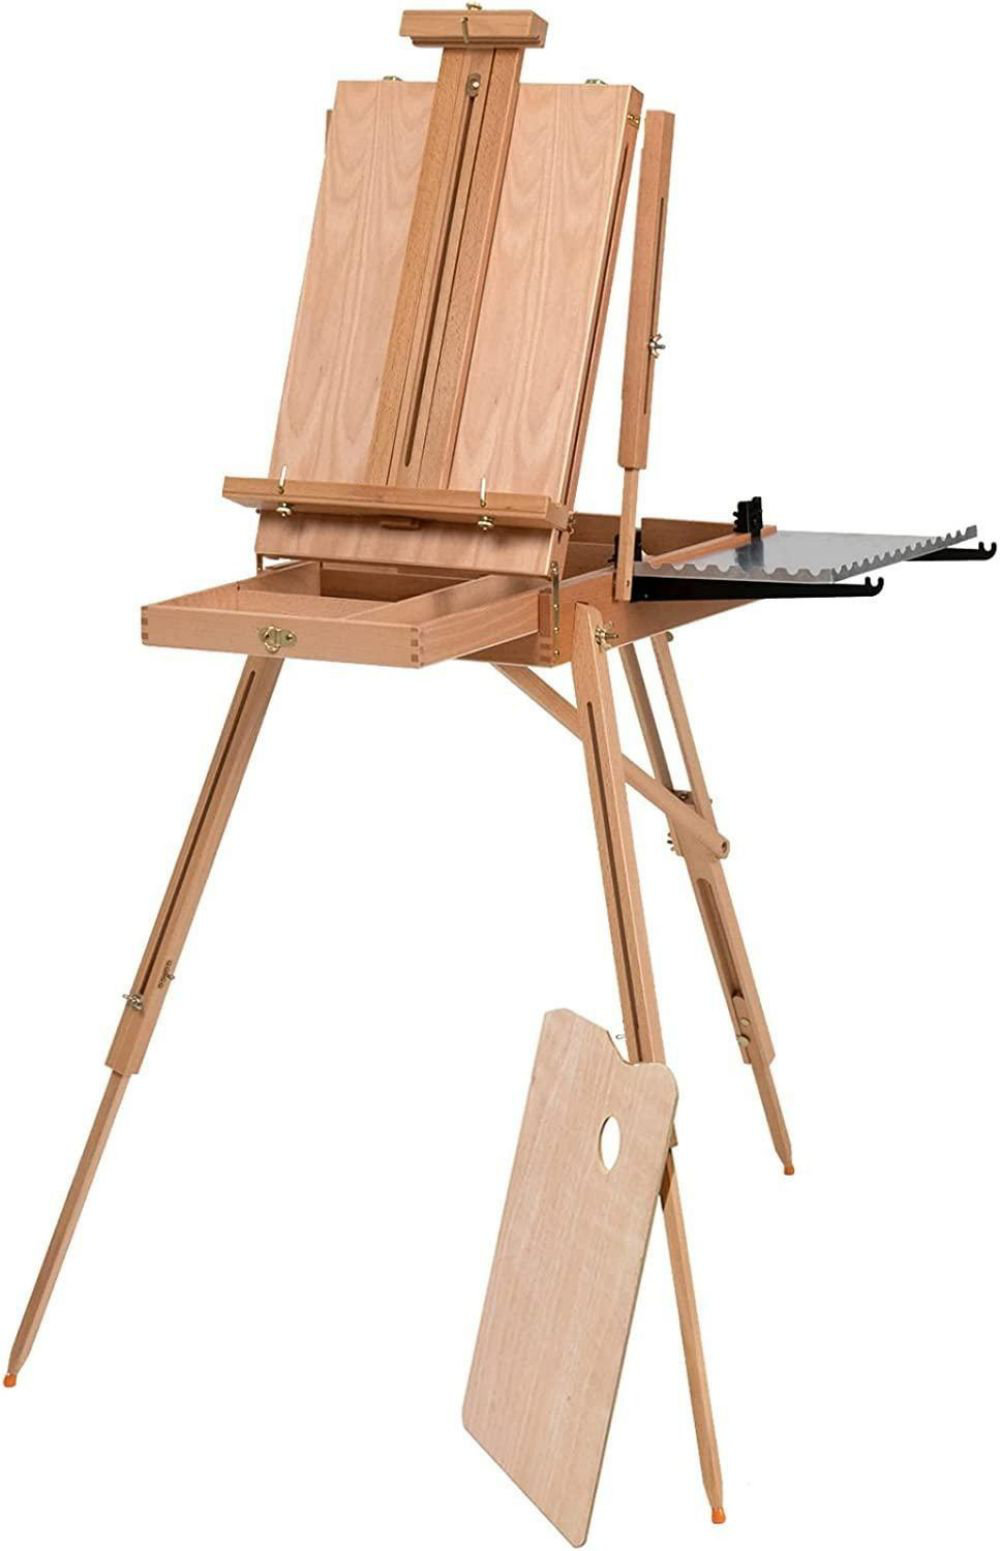 Gymax Wood Board Easel & Reviews